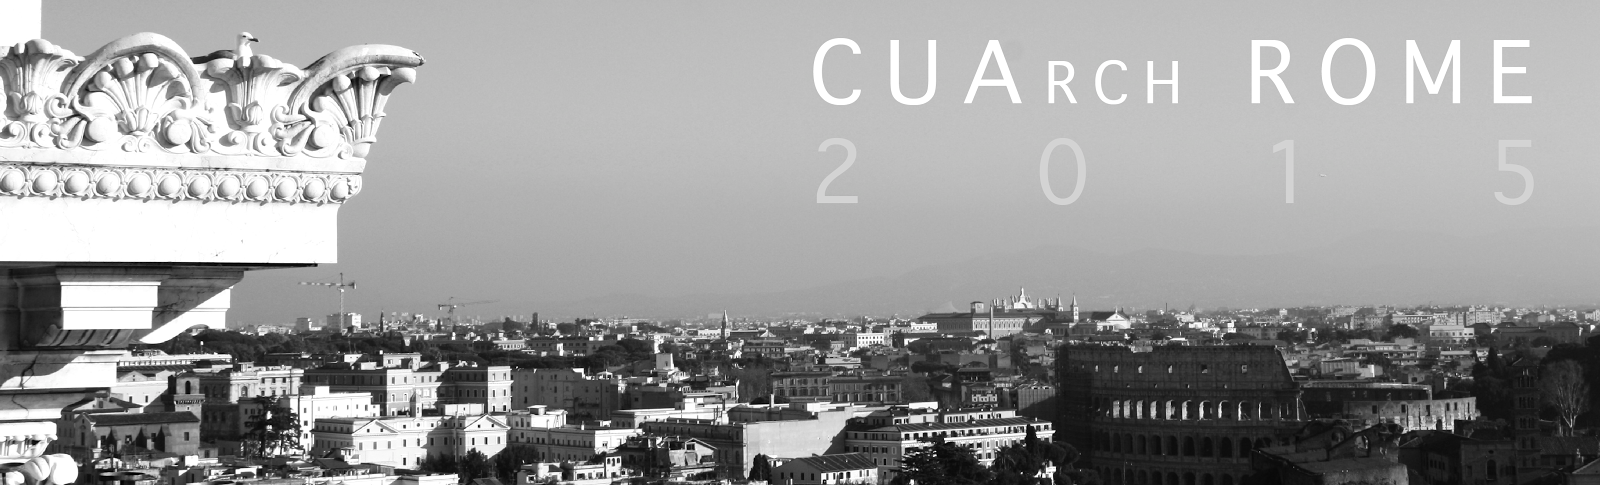               CUArch ROME 2015